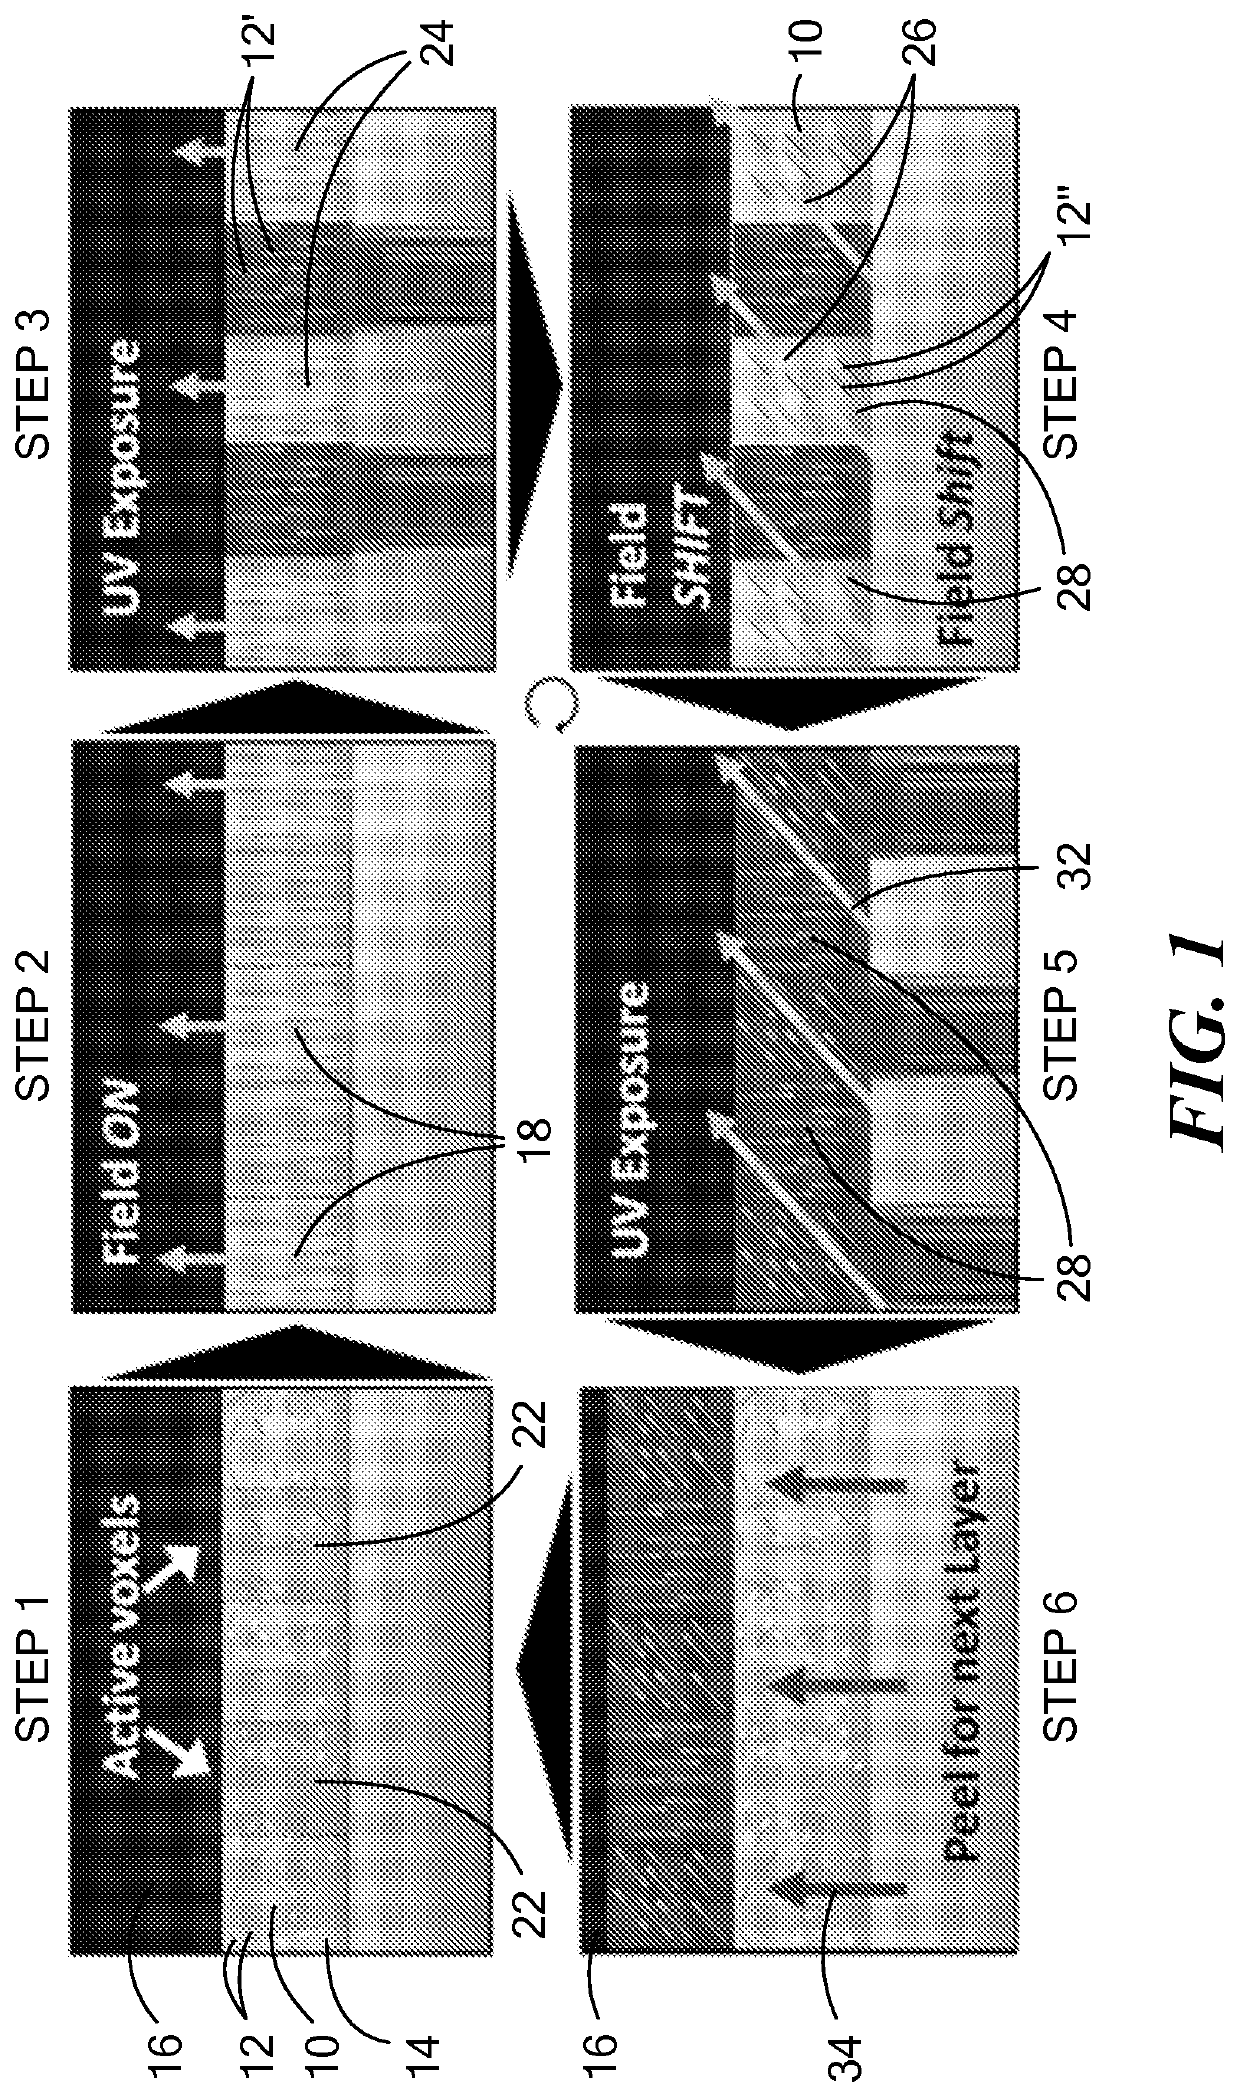 Additive manufacturing of discontinuous fiber composites using magnetic fields